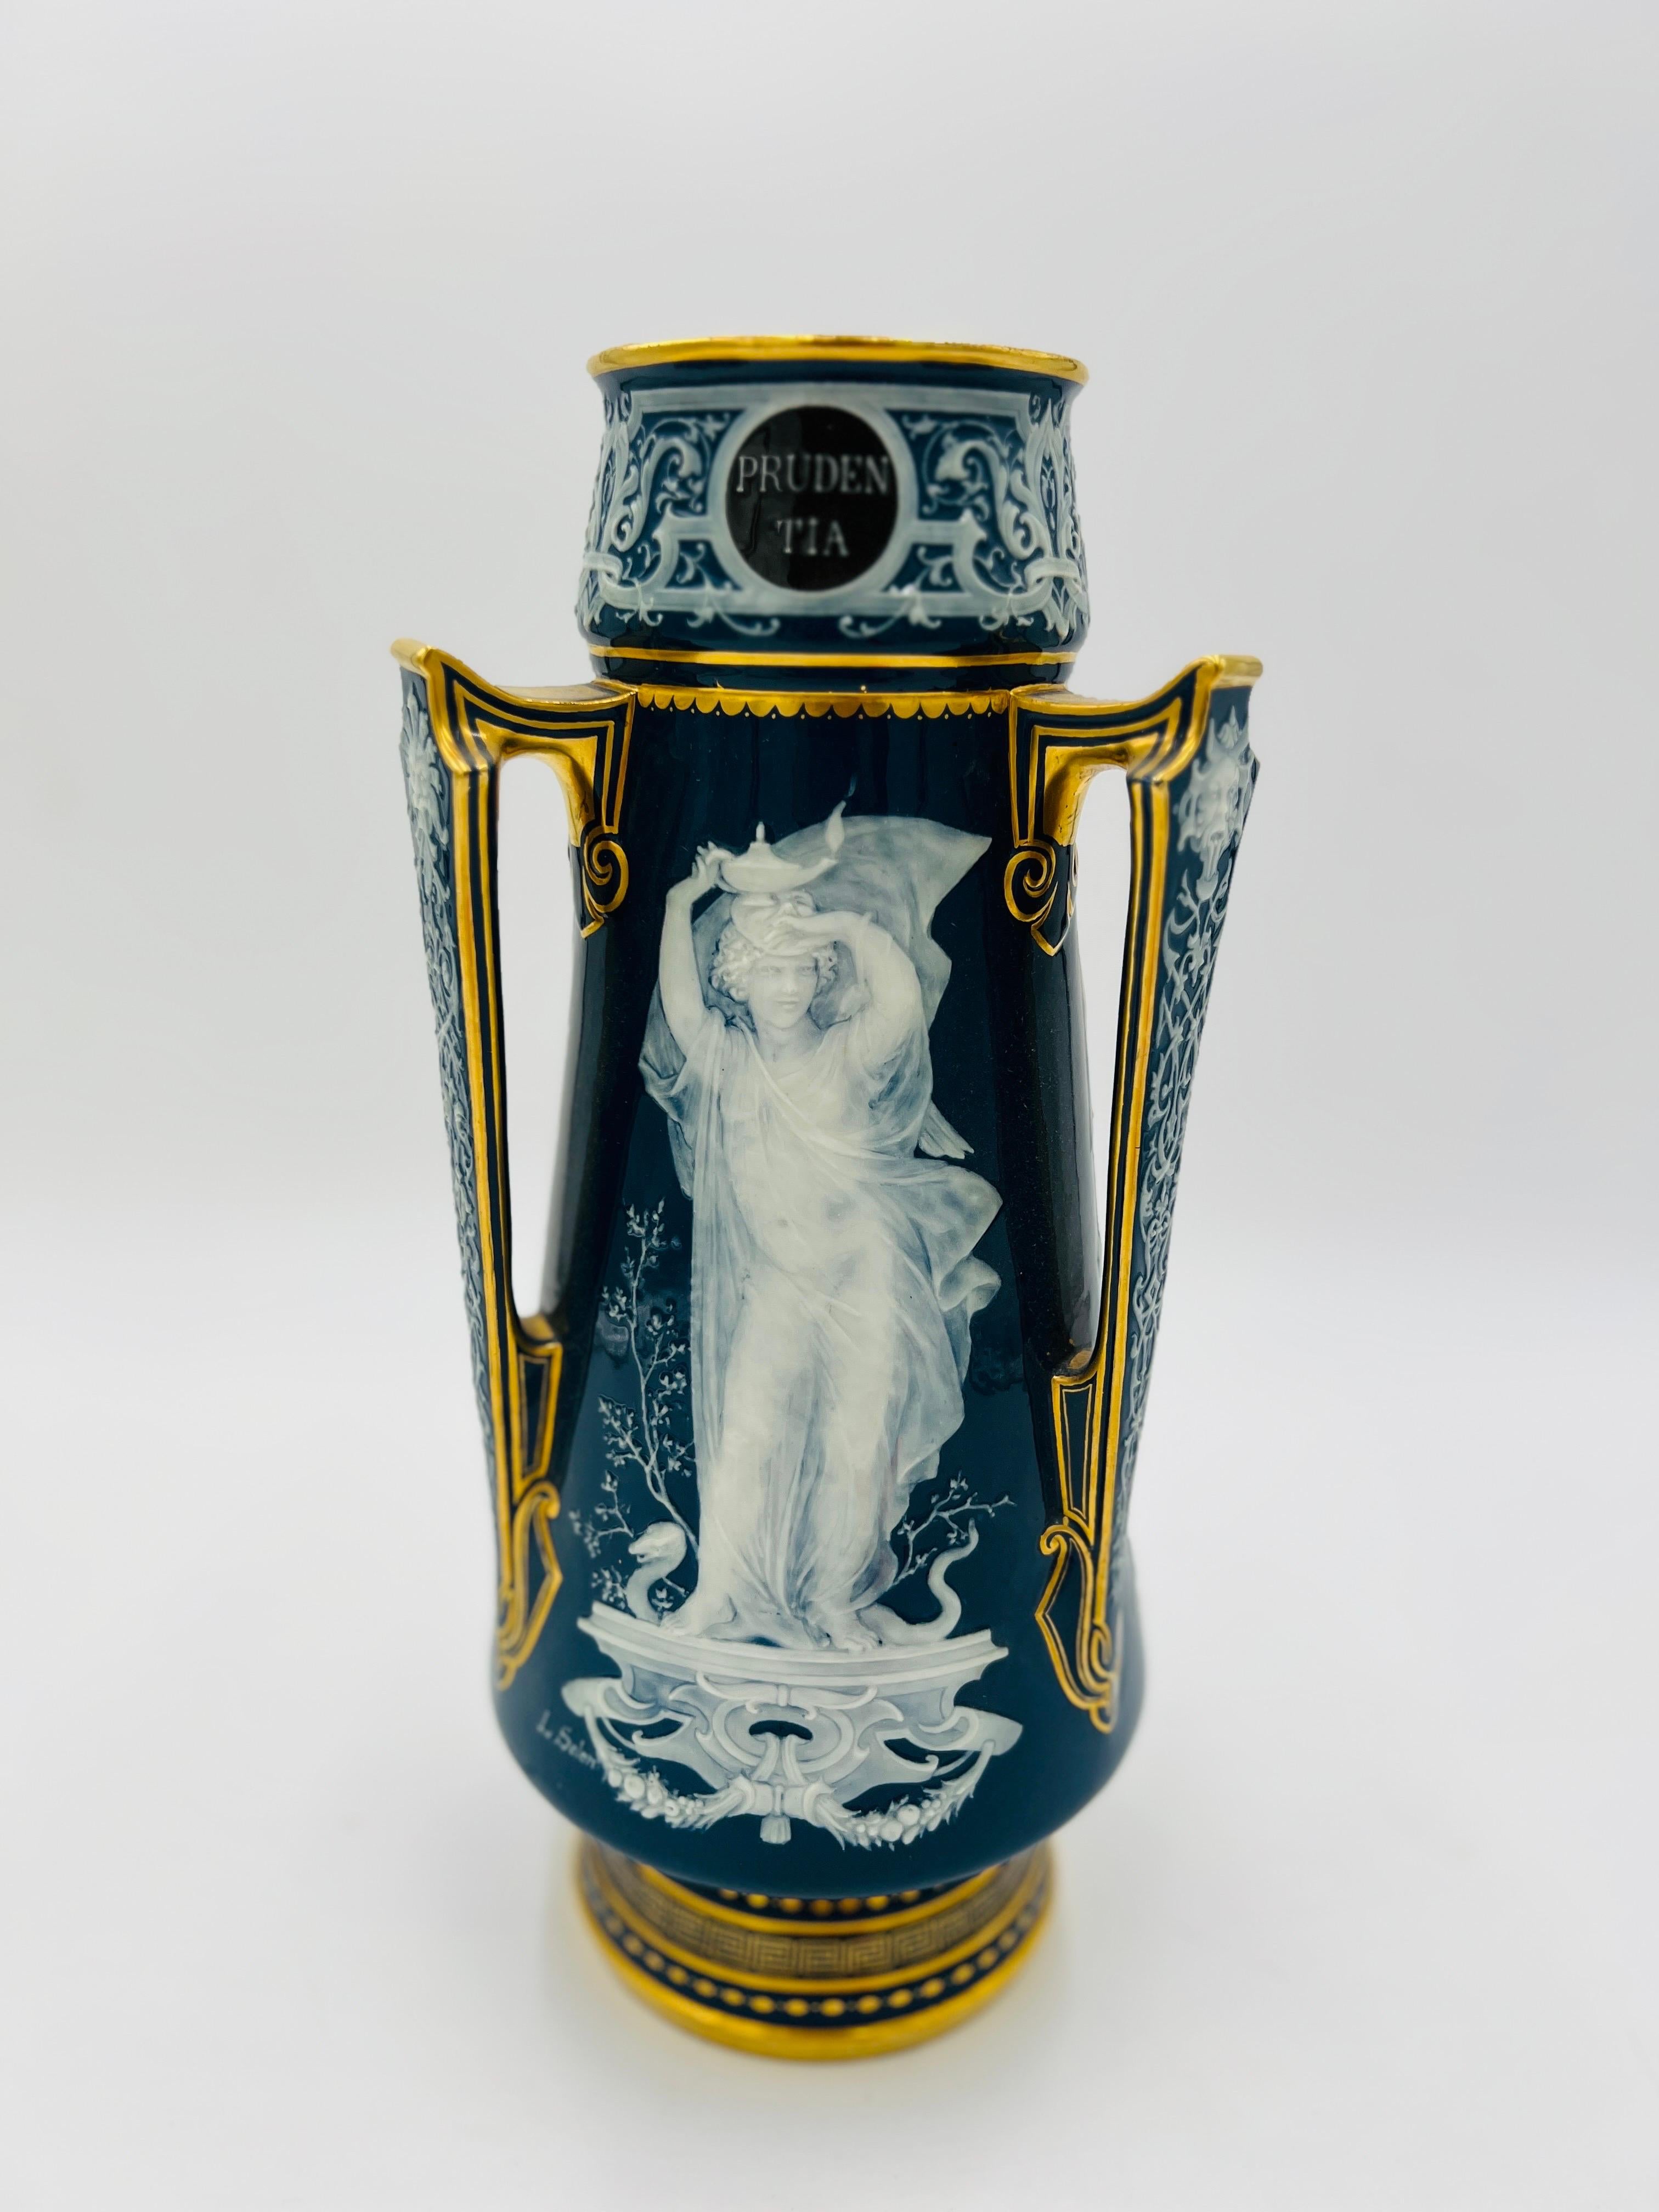 A highly unusual Louis Solon Mintons vase with peacock blue porcelain ground, Pate-Sur-Pate 3 panel decoration to body each depicting one of the “Cardinal Virtues”. 

Robur for Stength
Prudentia for Prudence 
Justitia for Justice for All

The